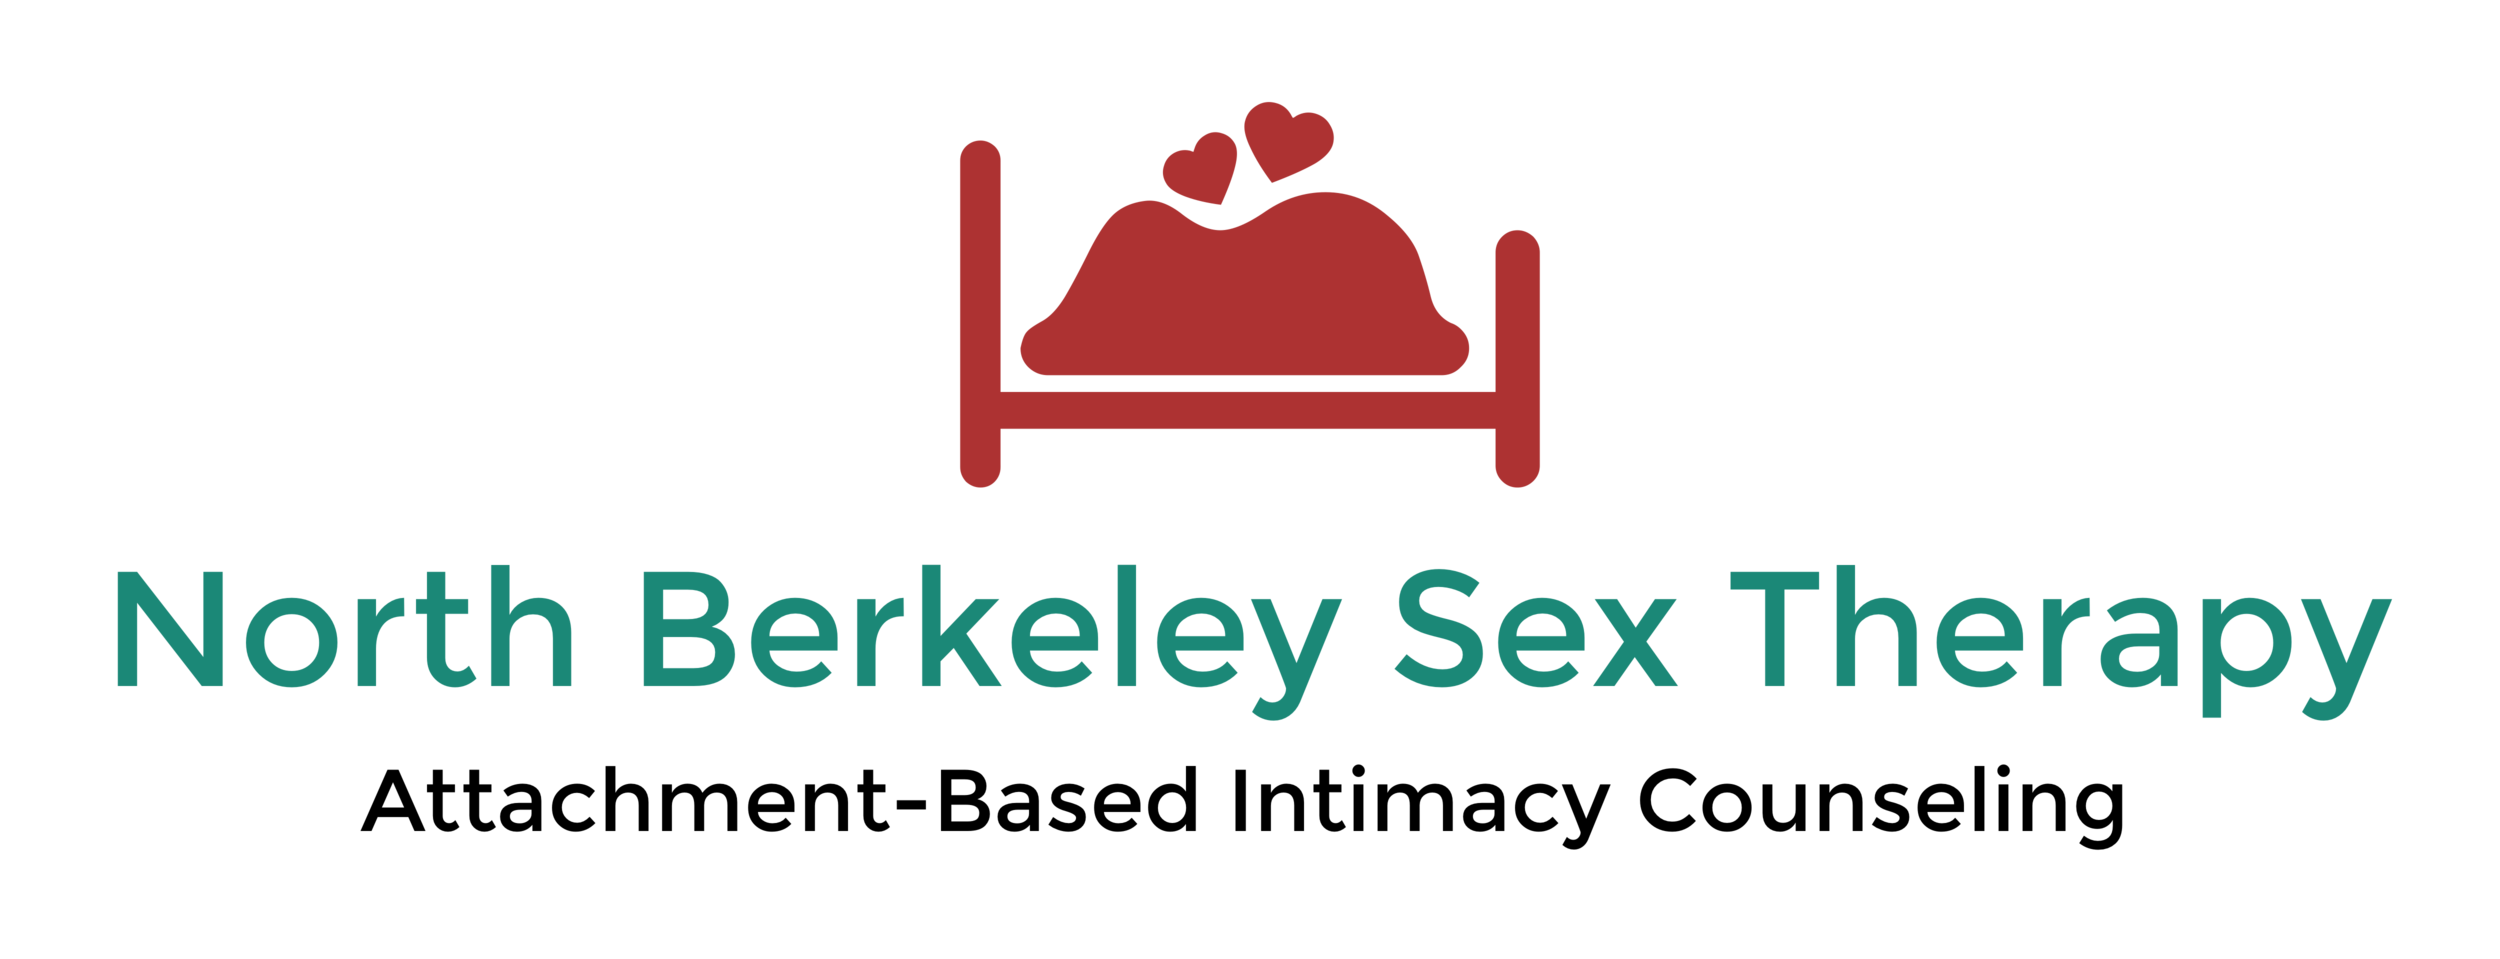 San Francisco Bay Area Sex and Intimacy Therapy — The Leading Sex Therapists and Couples Counselors in San Francisco Bay Area and East Bay Over 40 Locations Available